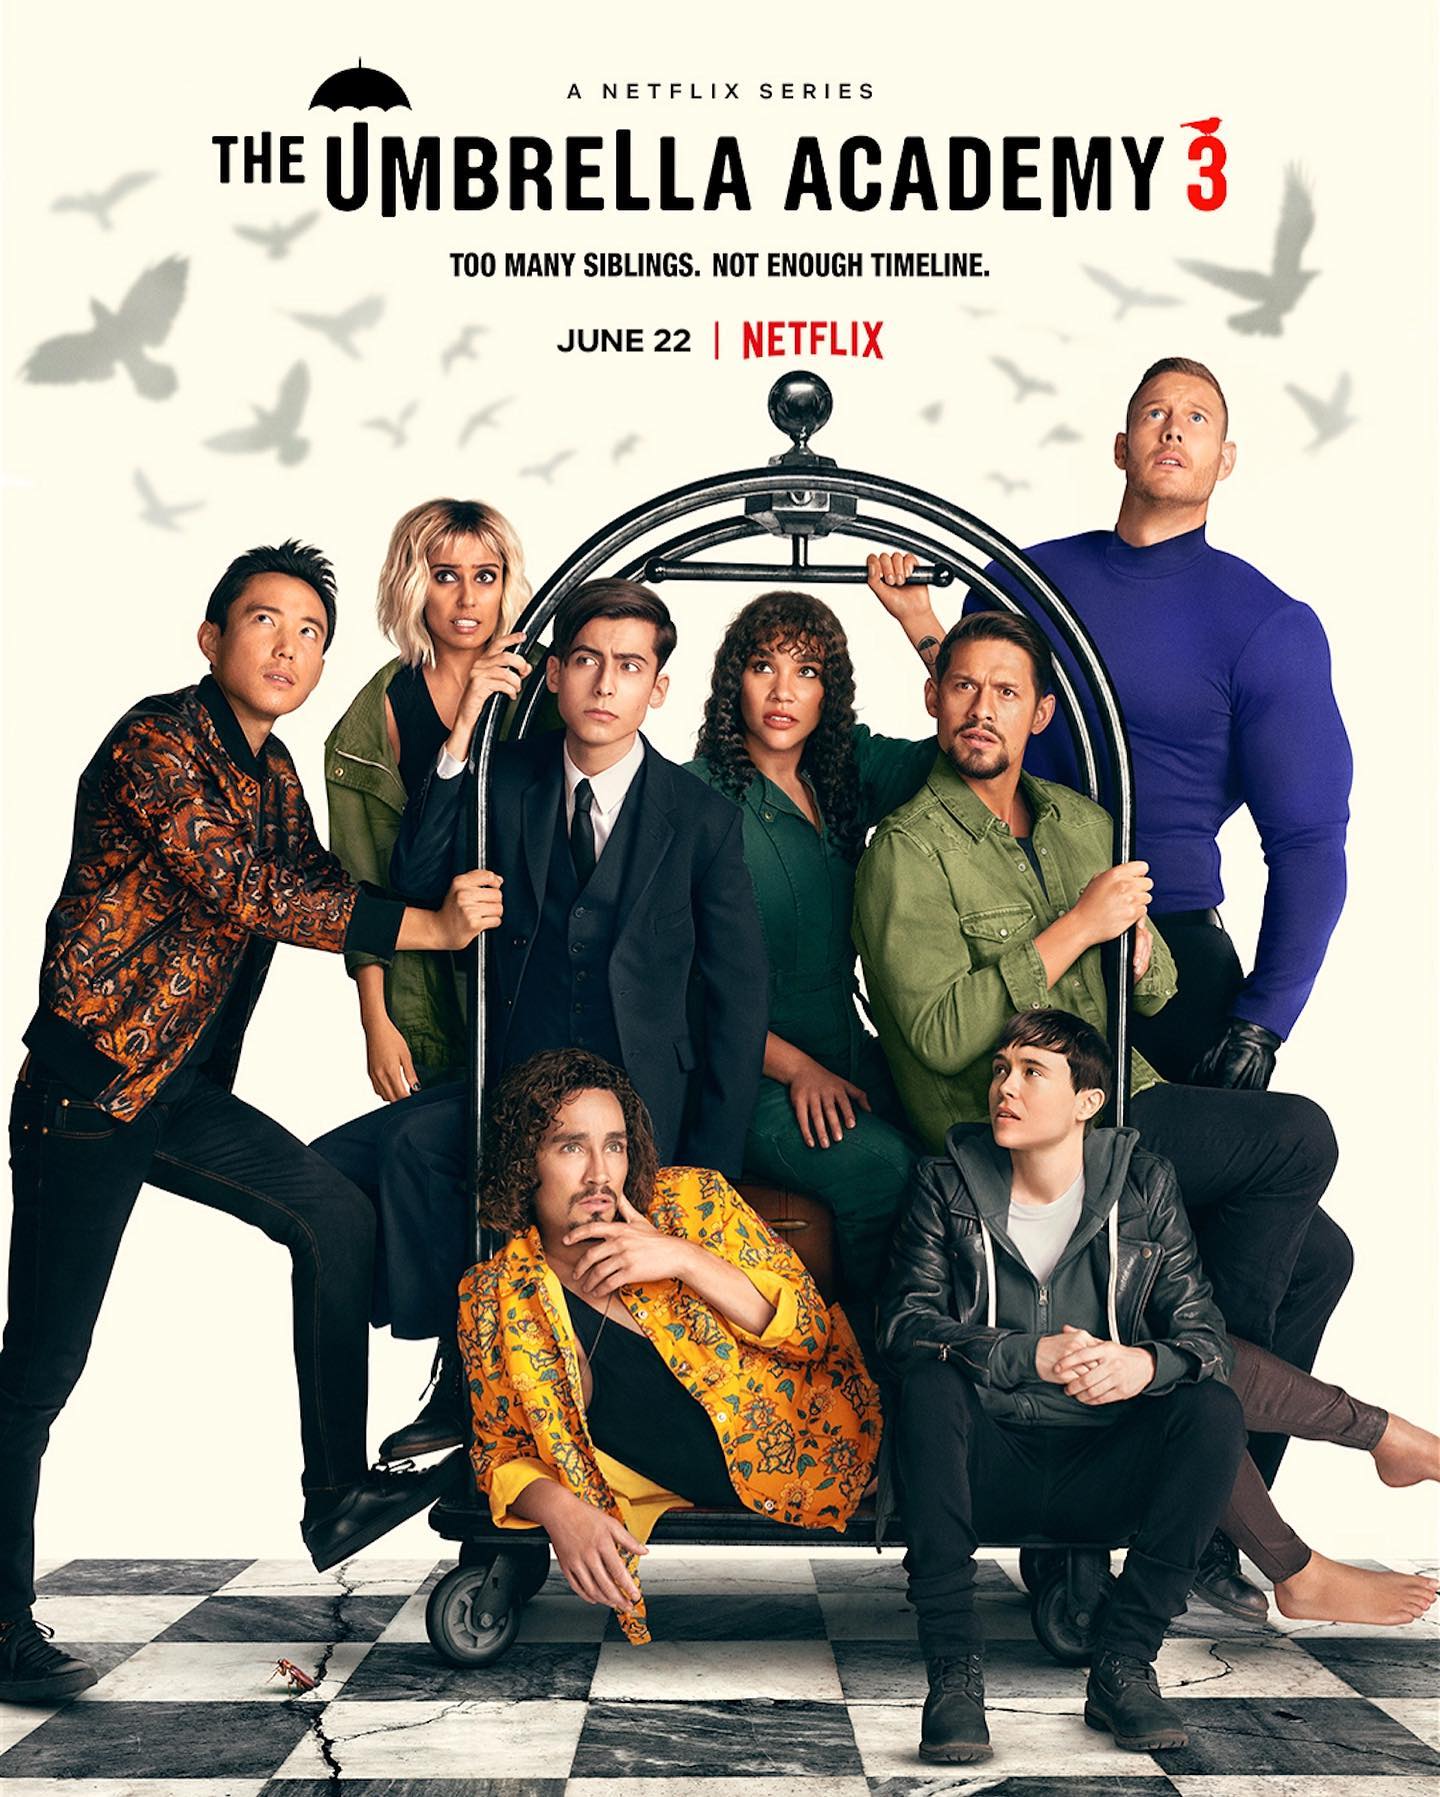 @umbrellaacad season 3 just premiered on @netflix !
We were grateful to have @christopherhargadondesign and the costume team rent some of our 20s and 60s stock from the collection. Looking forward to binge-watching the new season! 

#umbrellaacademy #netflix #vintagerentals #costumedesign #costumerentals #vintagecostume #vintageclothing #periodcostume